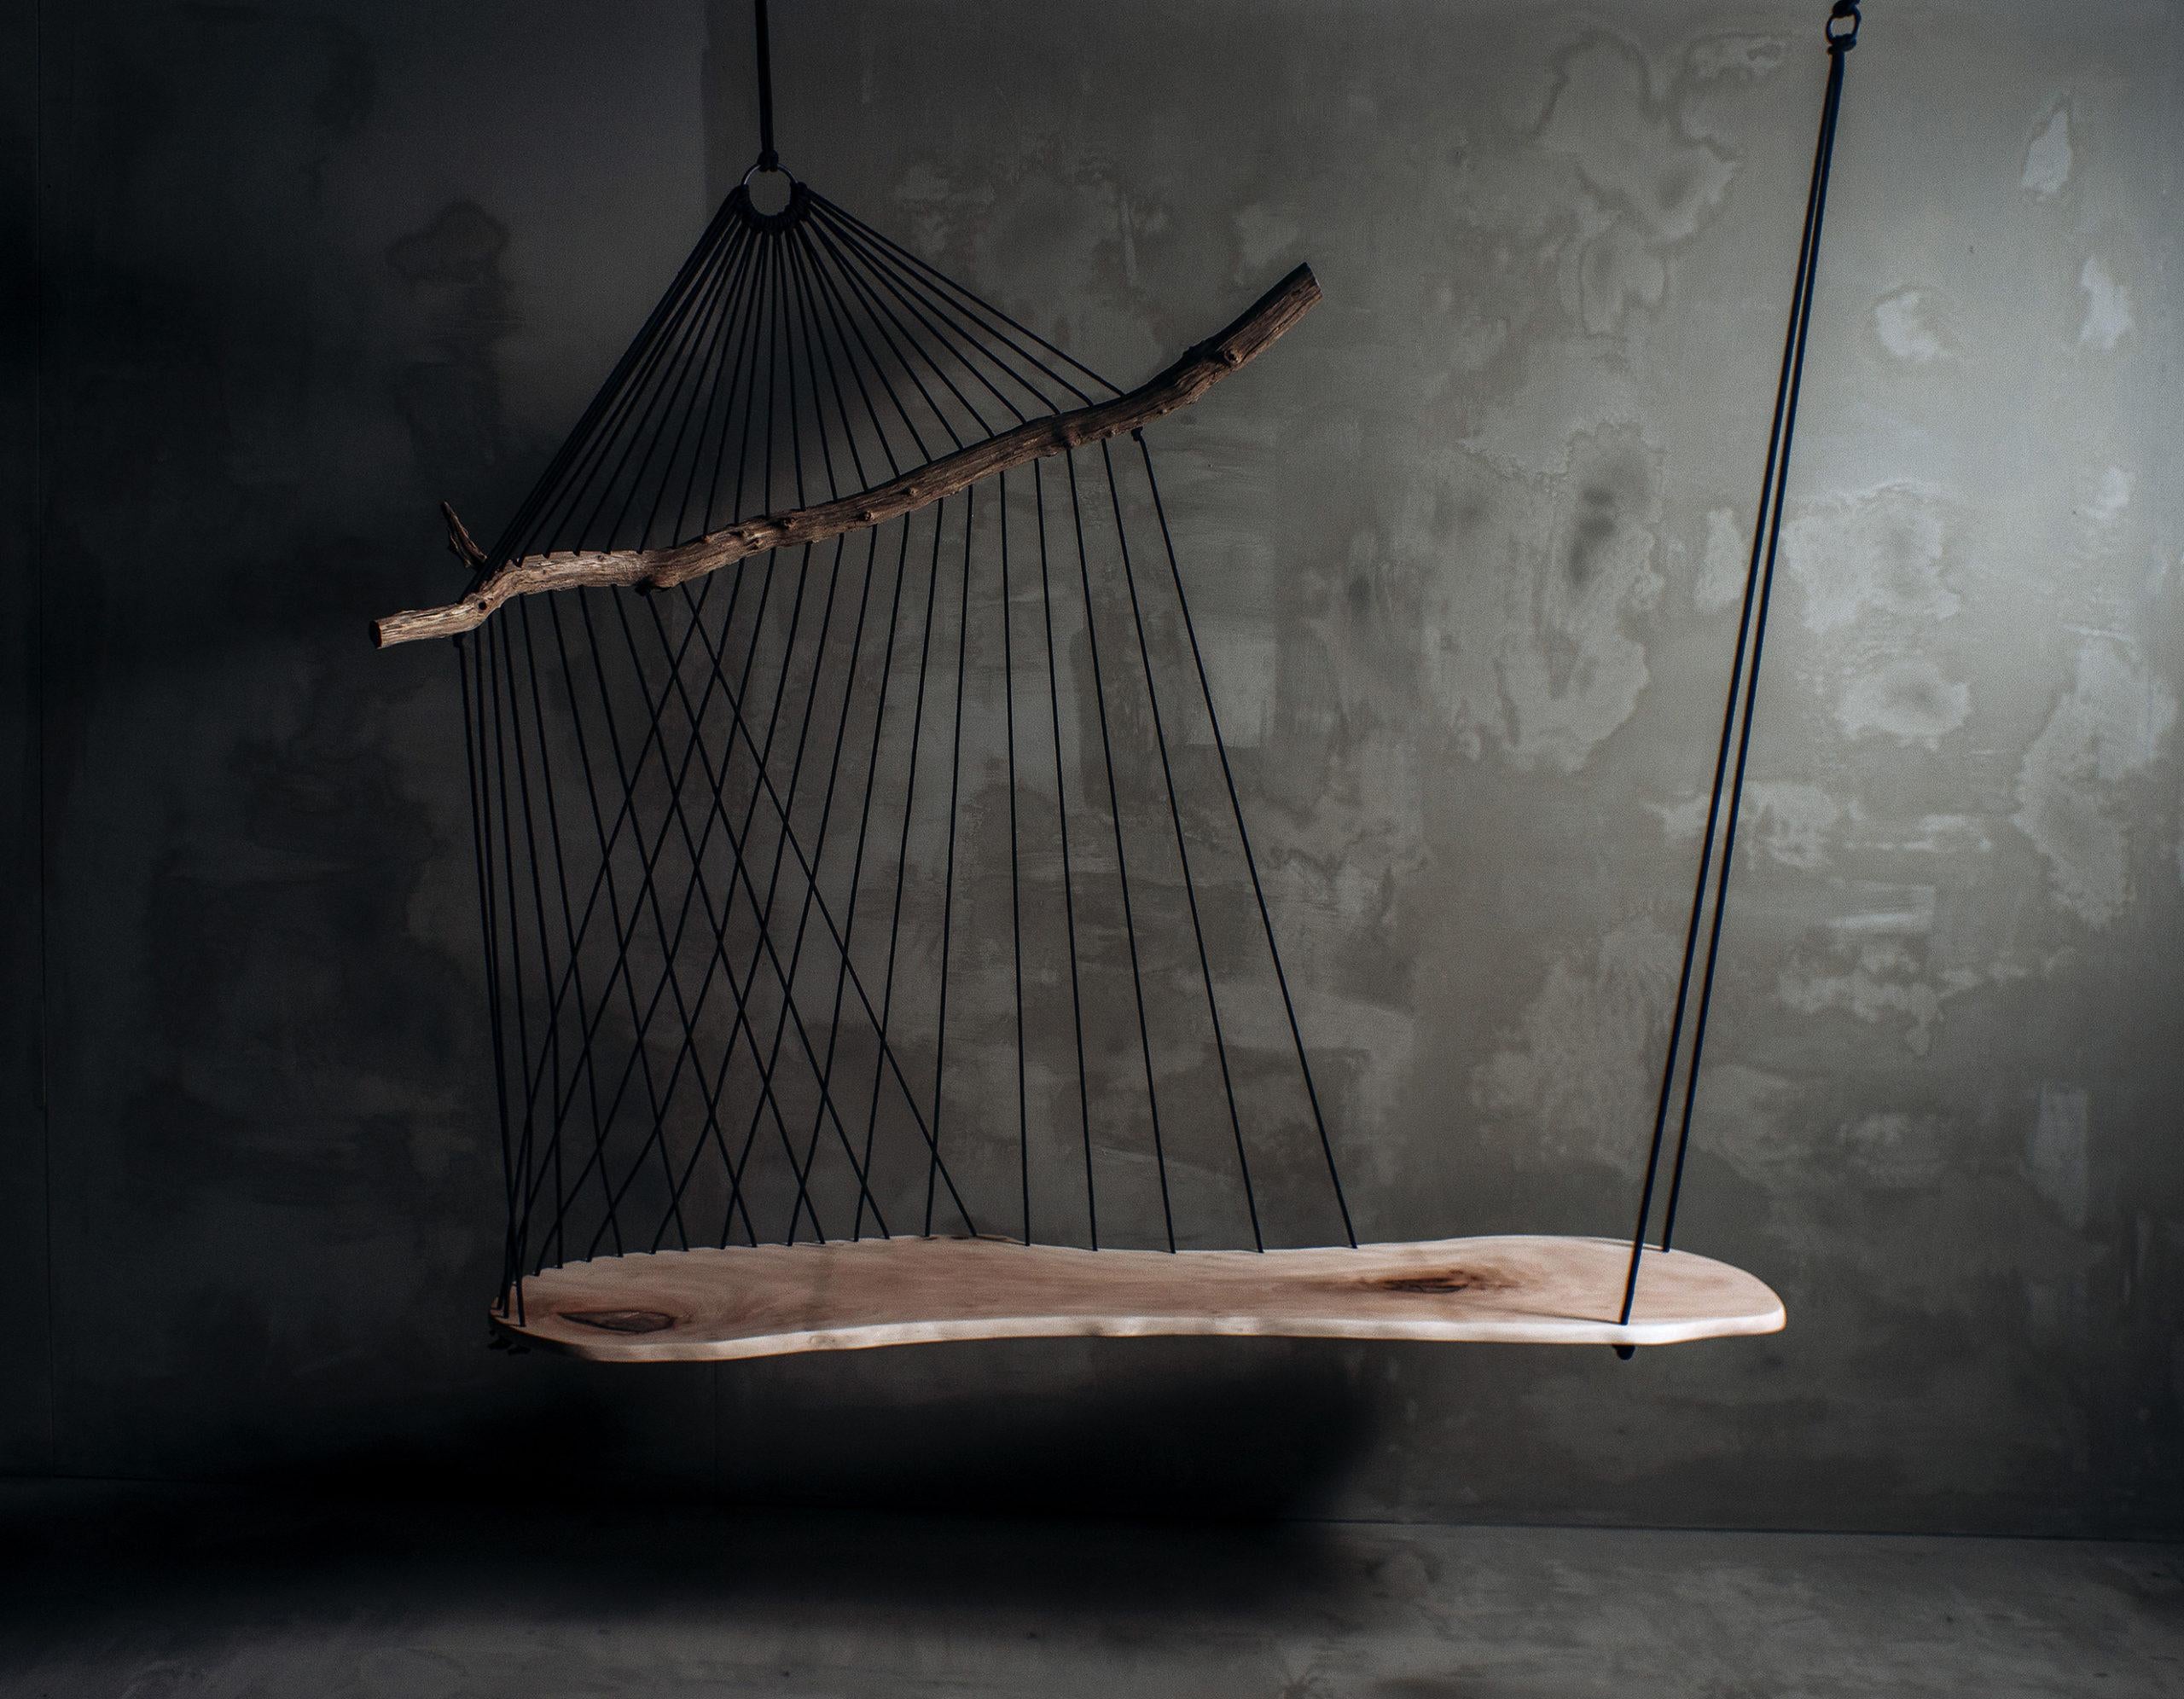 Contemporary burned double wooden seat - Floating Divan by Chiel Kuijl for WDSTCK

Design: Chiel Kuijl 
Material: Sustainable European wood

Dimensions: height 110 cm, width 190 cm depth 55 cm.

Handcrafted in The Netherlands

The Floating